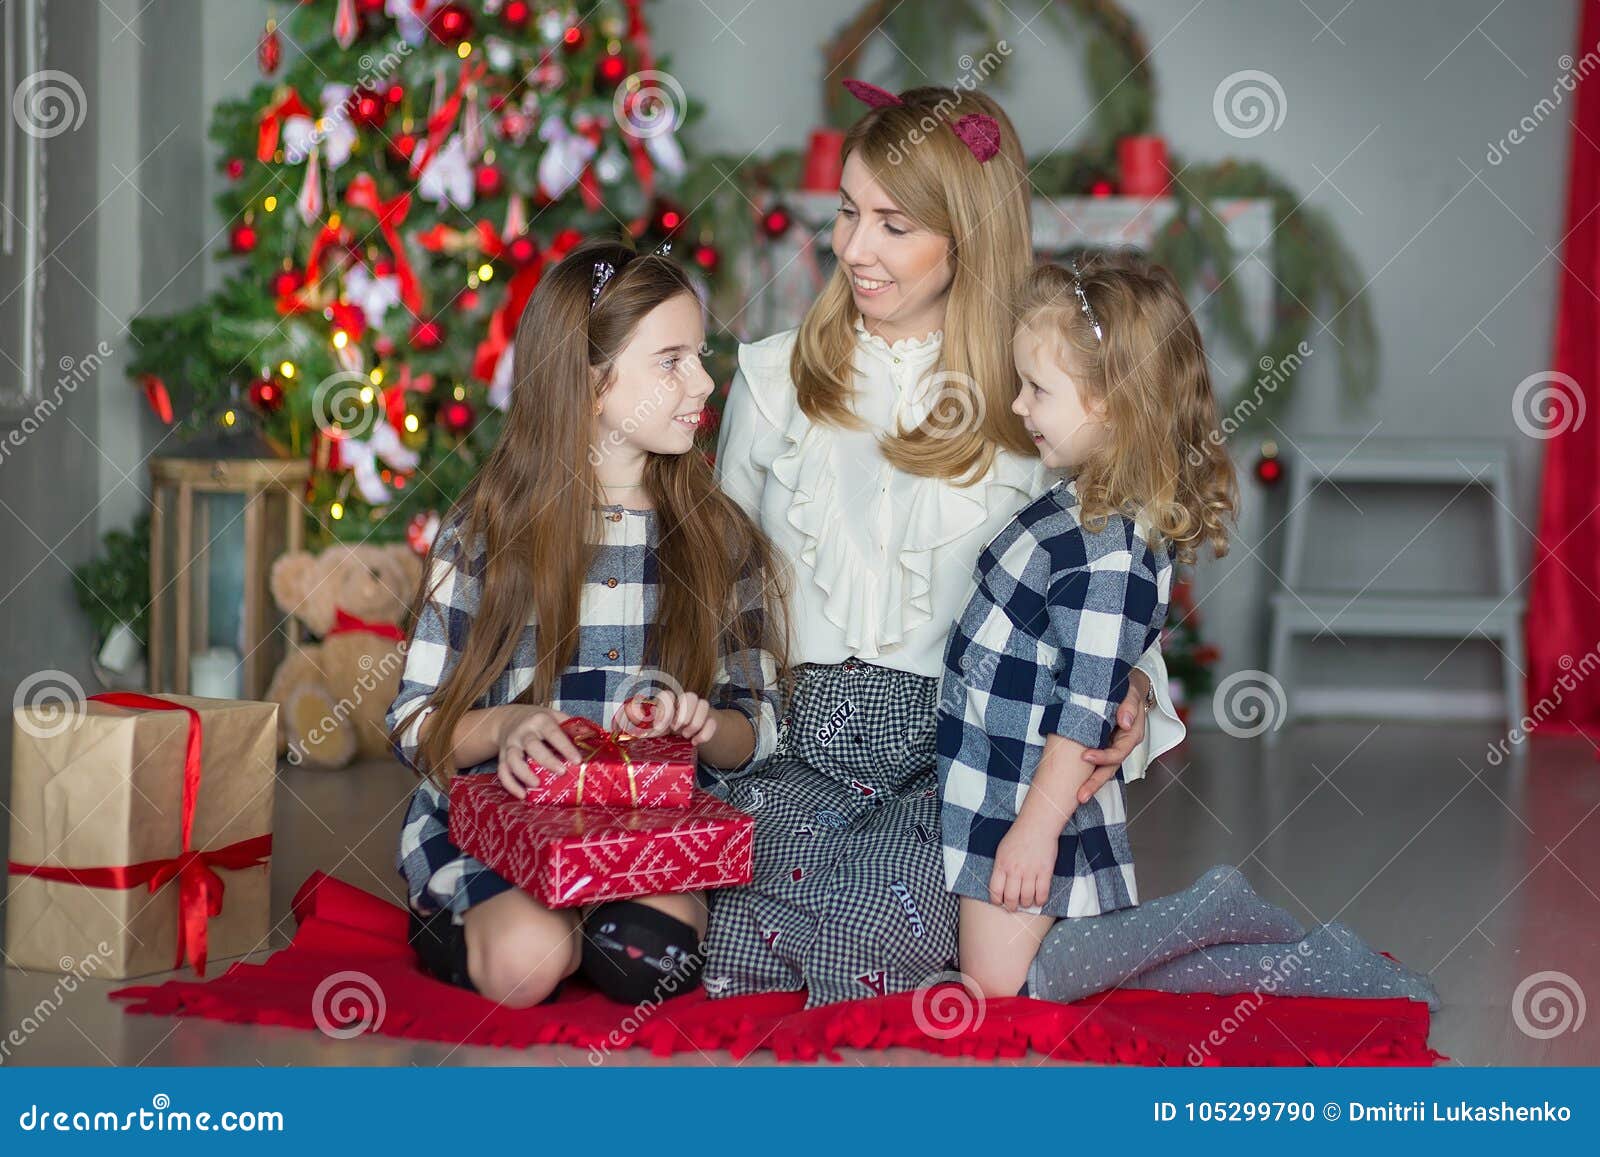 Cute Awesome Blond Mother Mom With Two Girls Daughters Celebratin